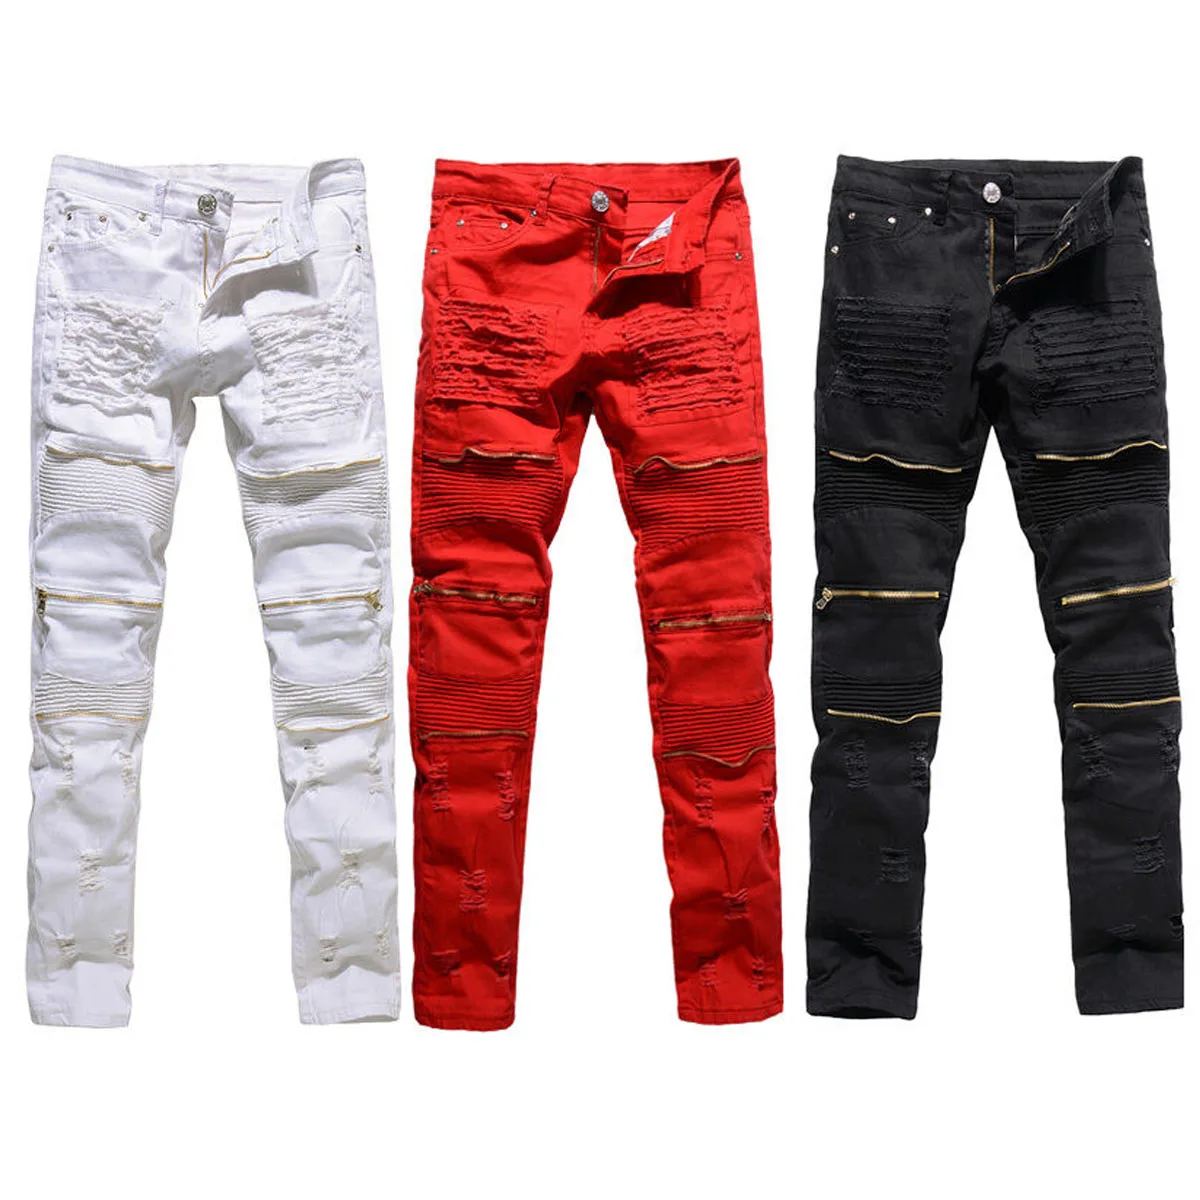 

Men Skinny Black White Red Jeans Stretch Denim Ripped Pants Distressed Ripped Freyed Slim Fit Jeans Destroyed Ripped Jeans